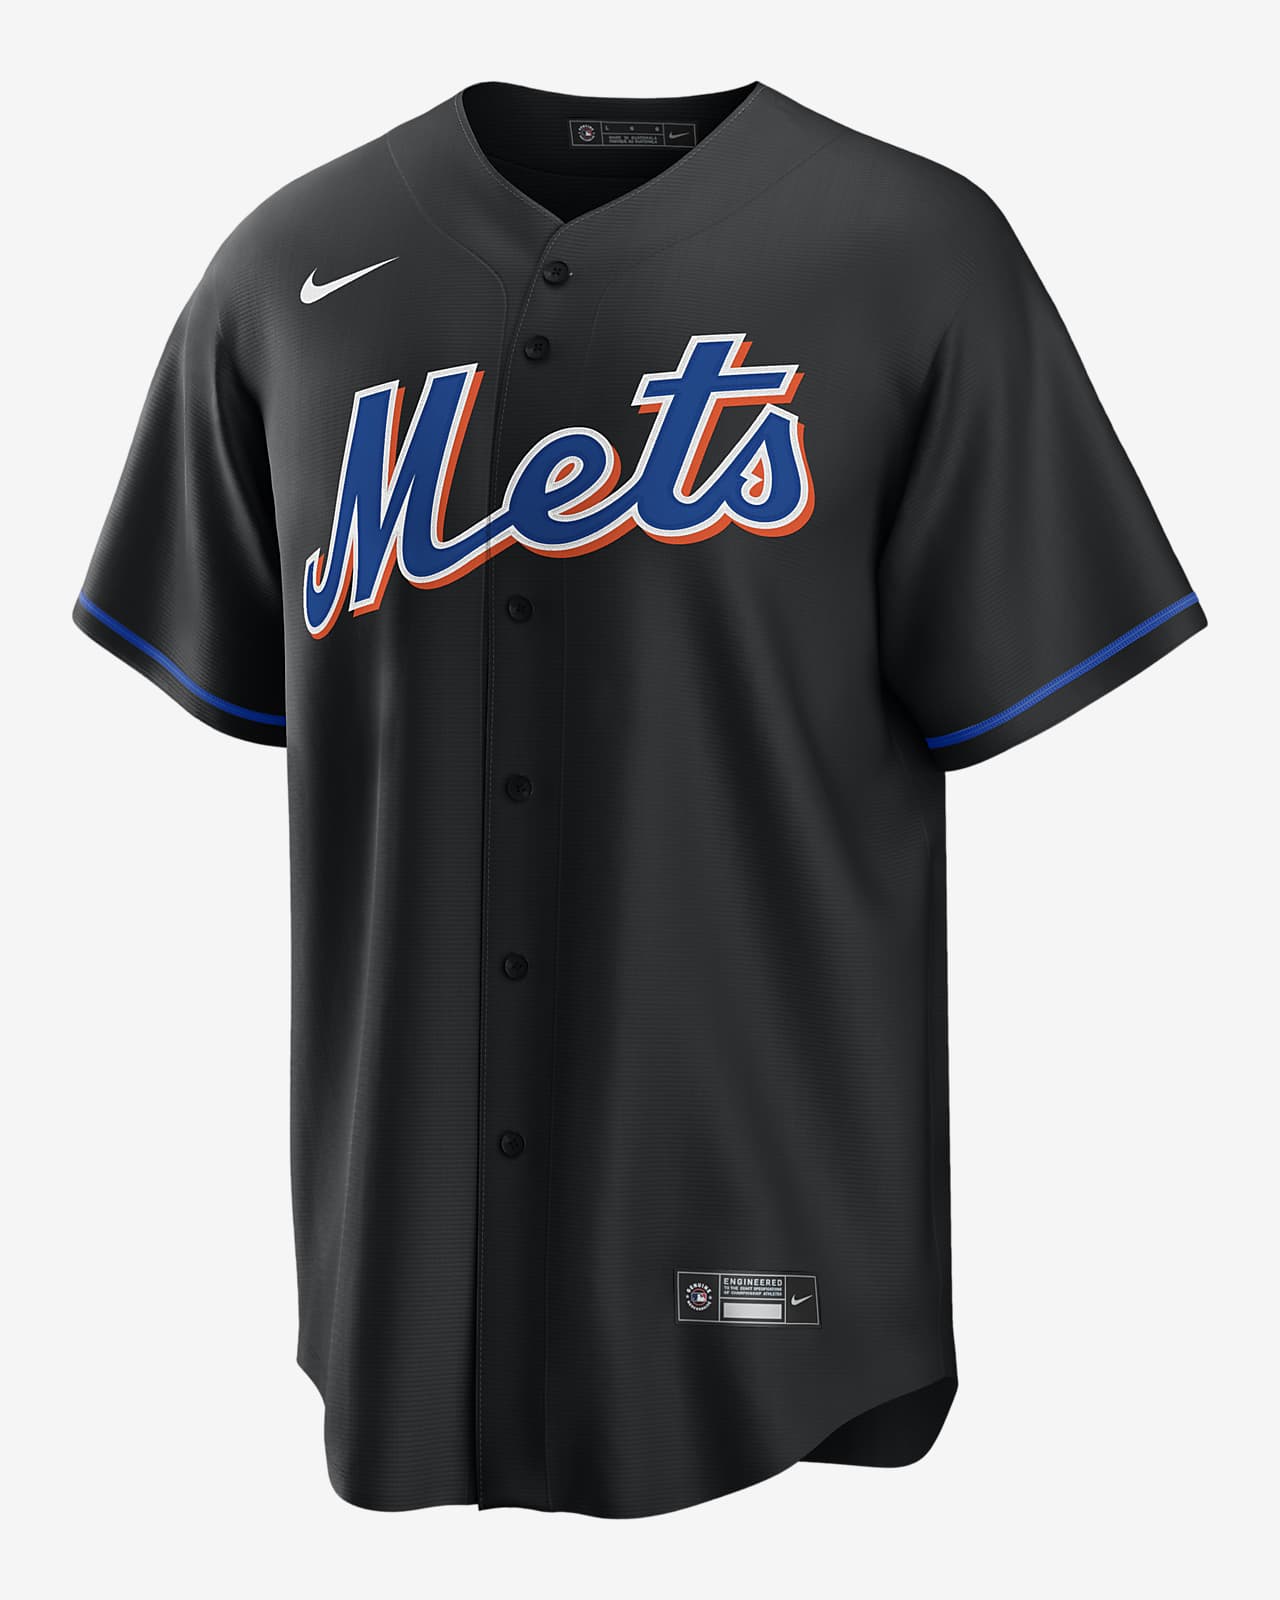 New York Mets Personalized Youth Jersey